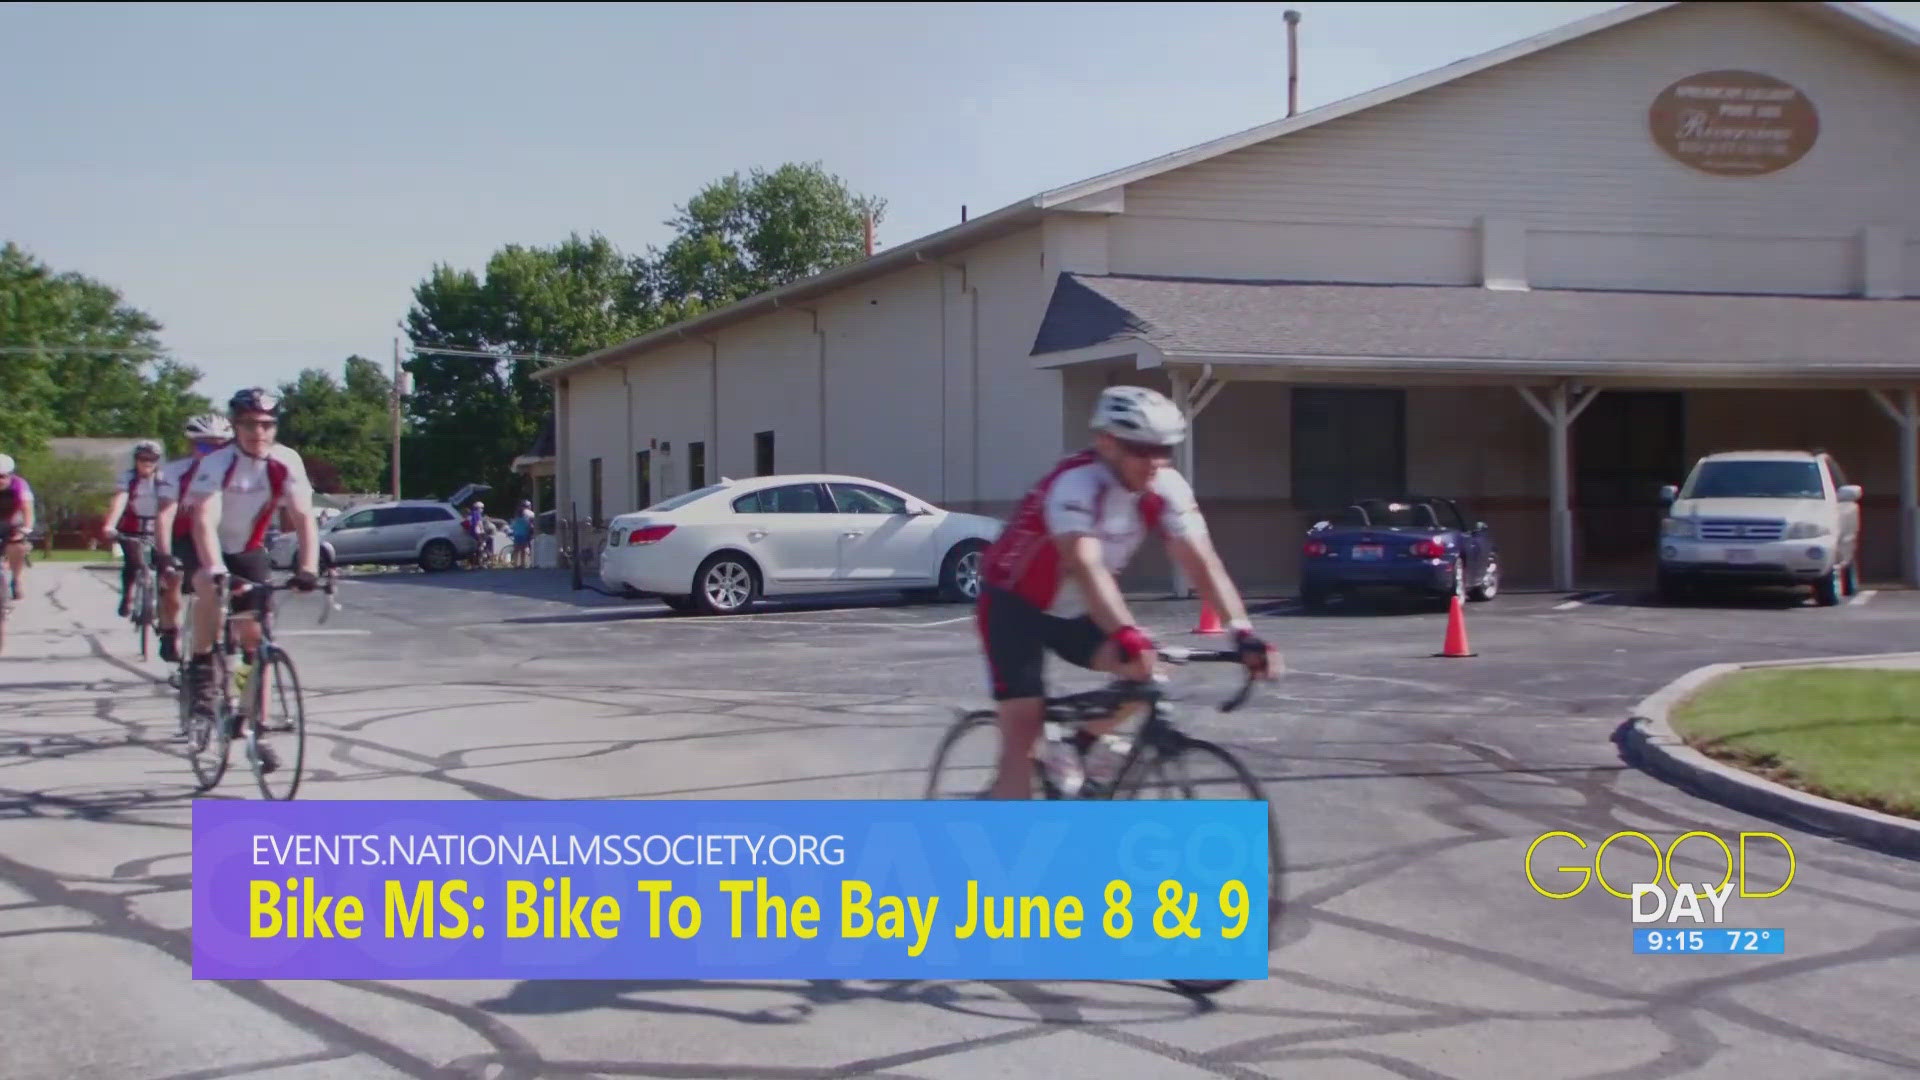 Austin Fleischer and Joe Shrader talk 'Bike to the Bay', a fundraising event for multiple sclerosis research.